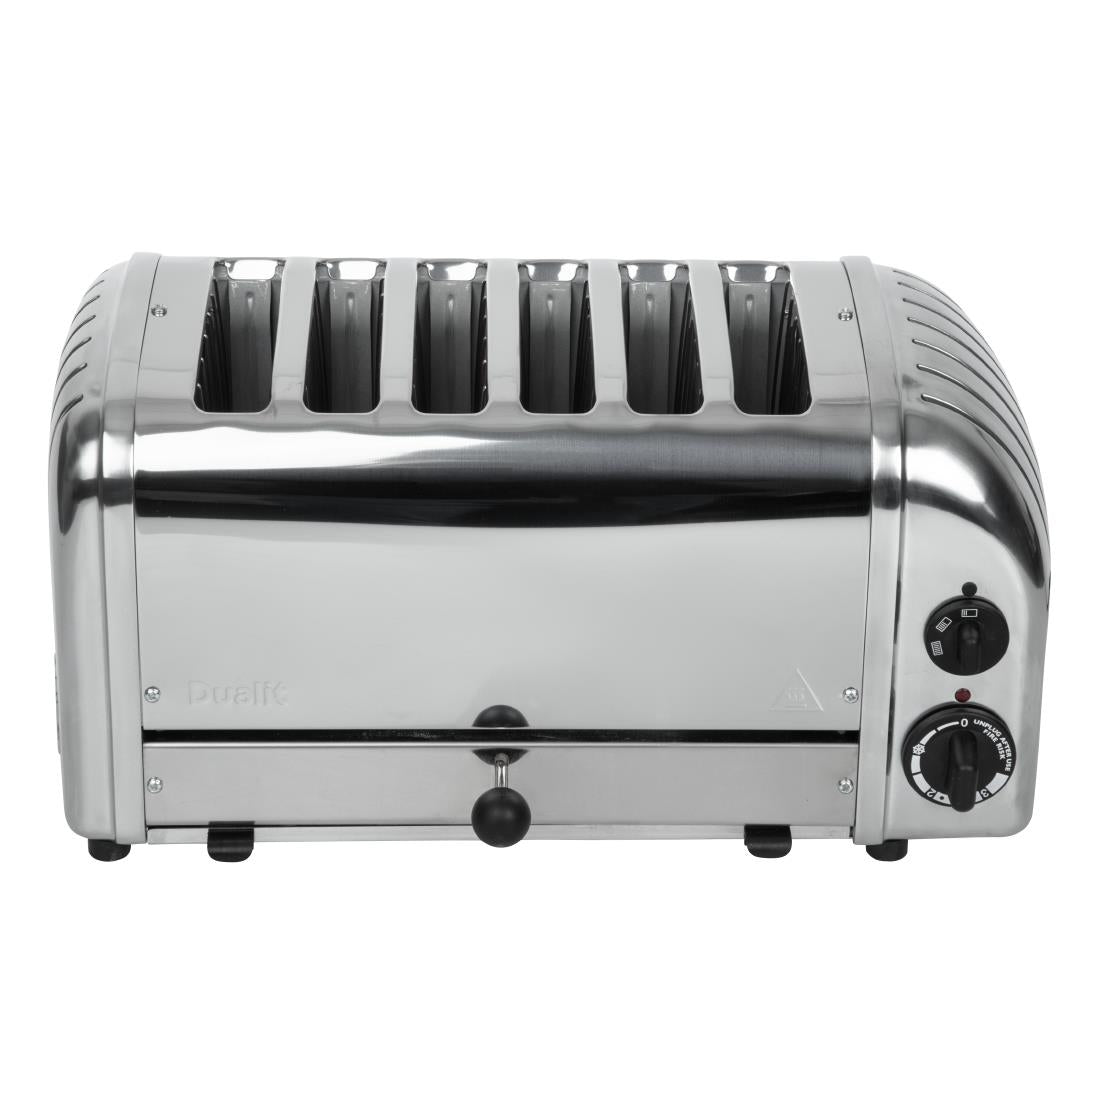 Dualit 6 Slice Vario Toaster Stainless Steel 60144 JD Catering Equipment Solutions Ltd